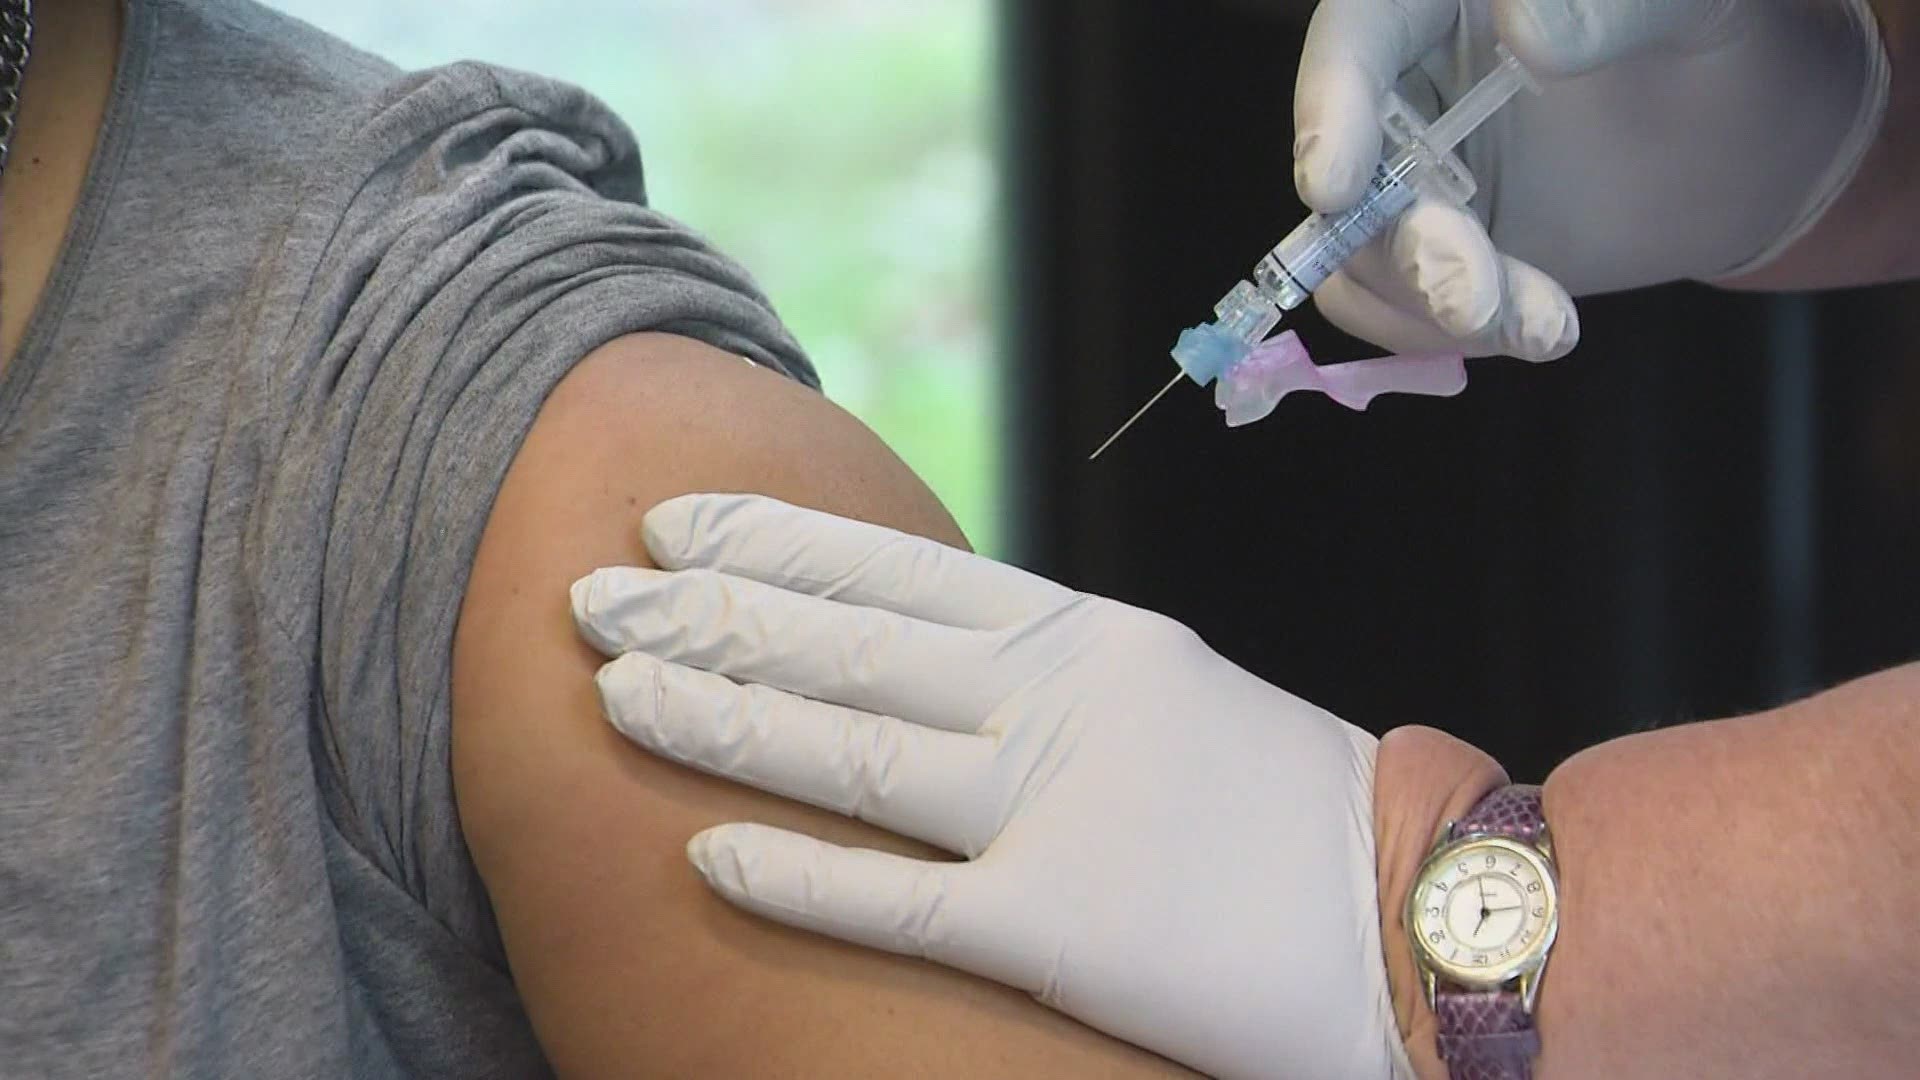 Maine's Department of Health and Human Services wants to require all health care professionals get a flu shot and some healthcare workers are against it.